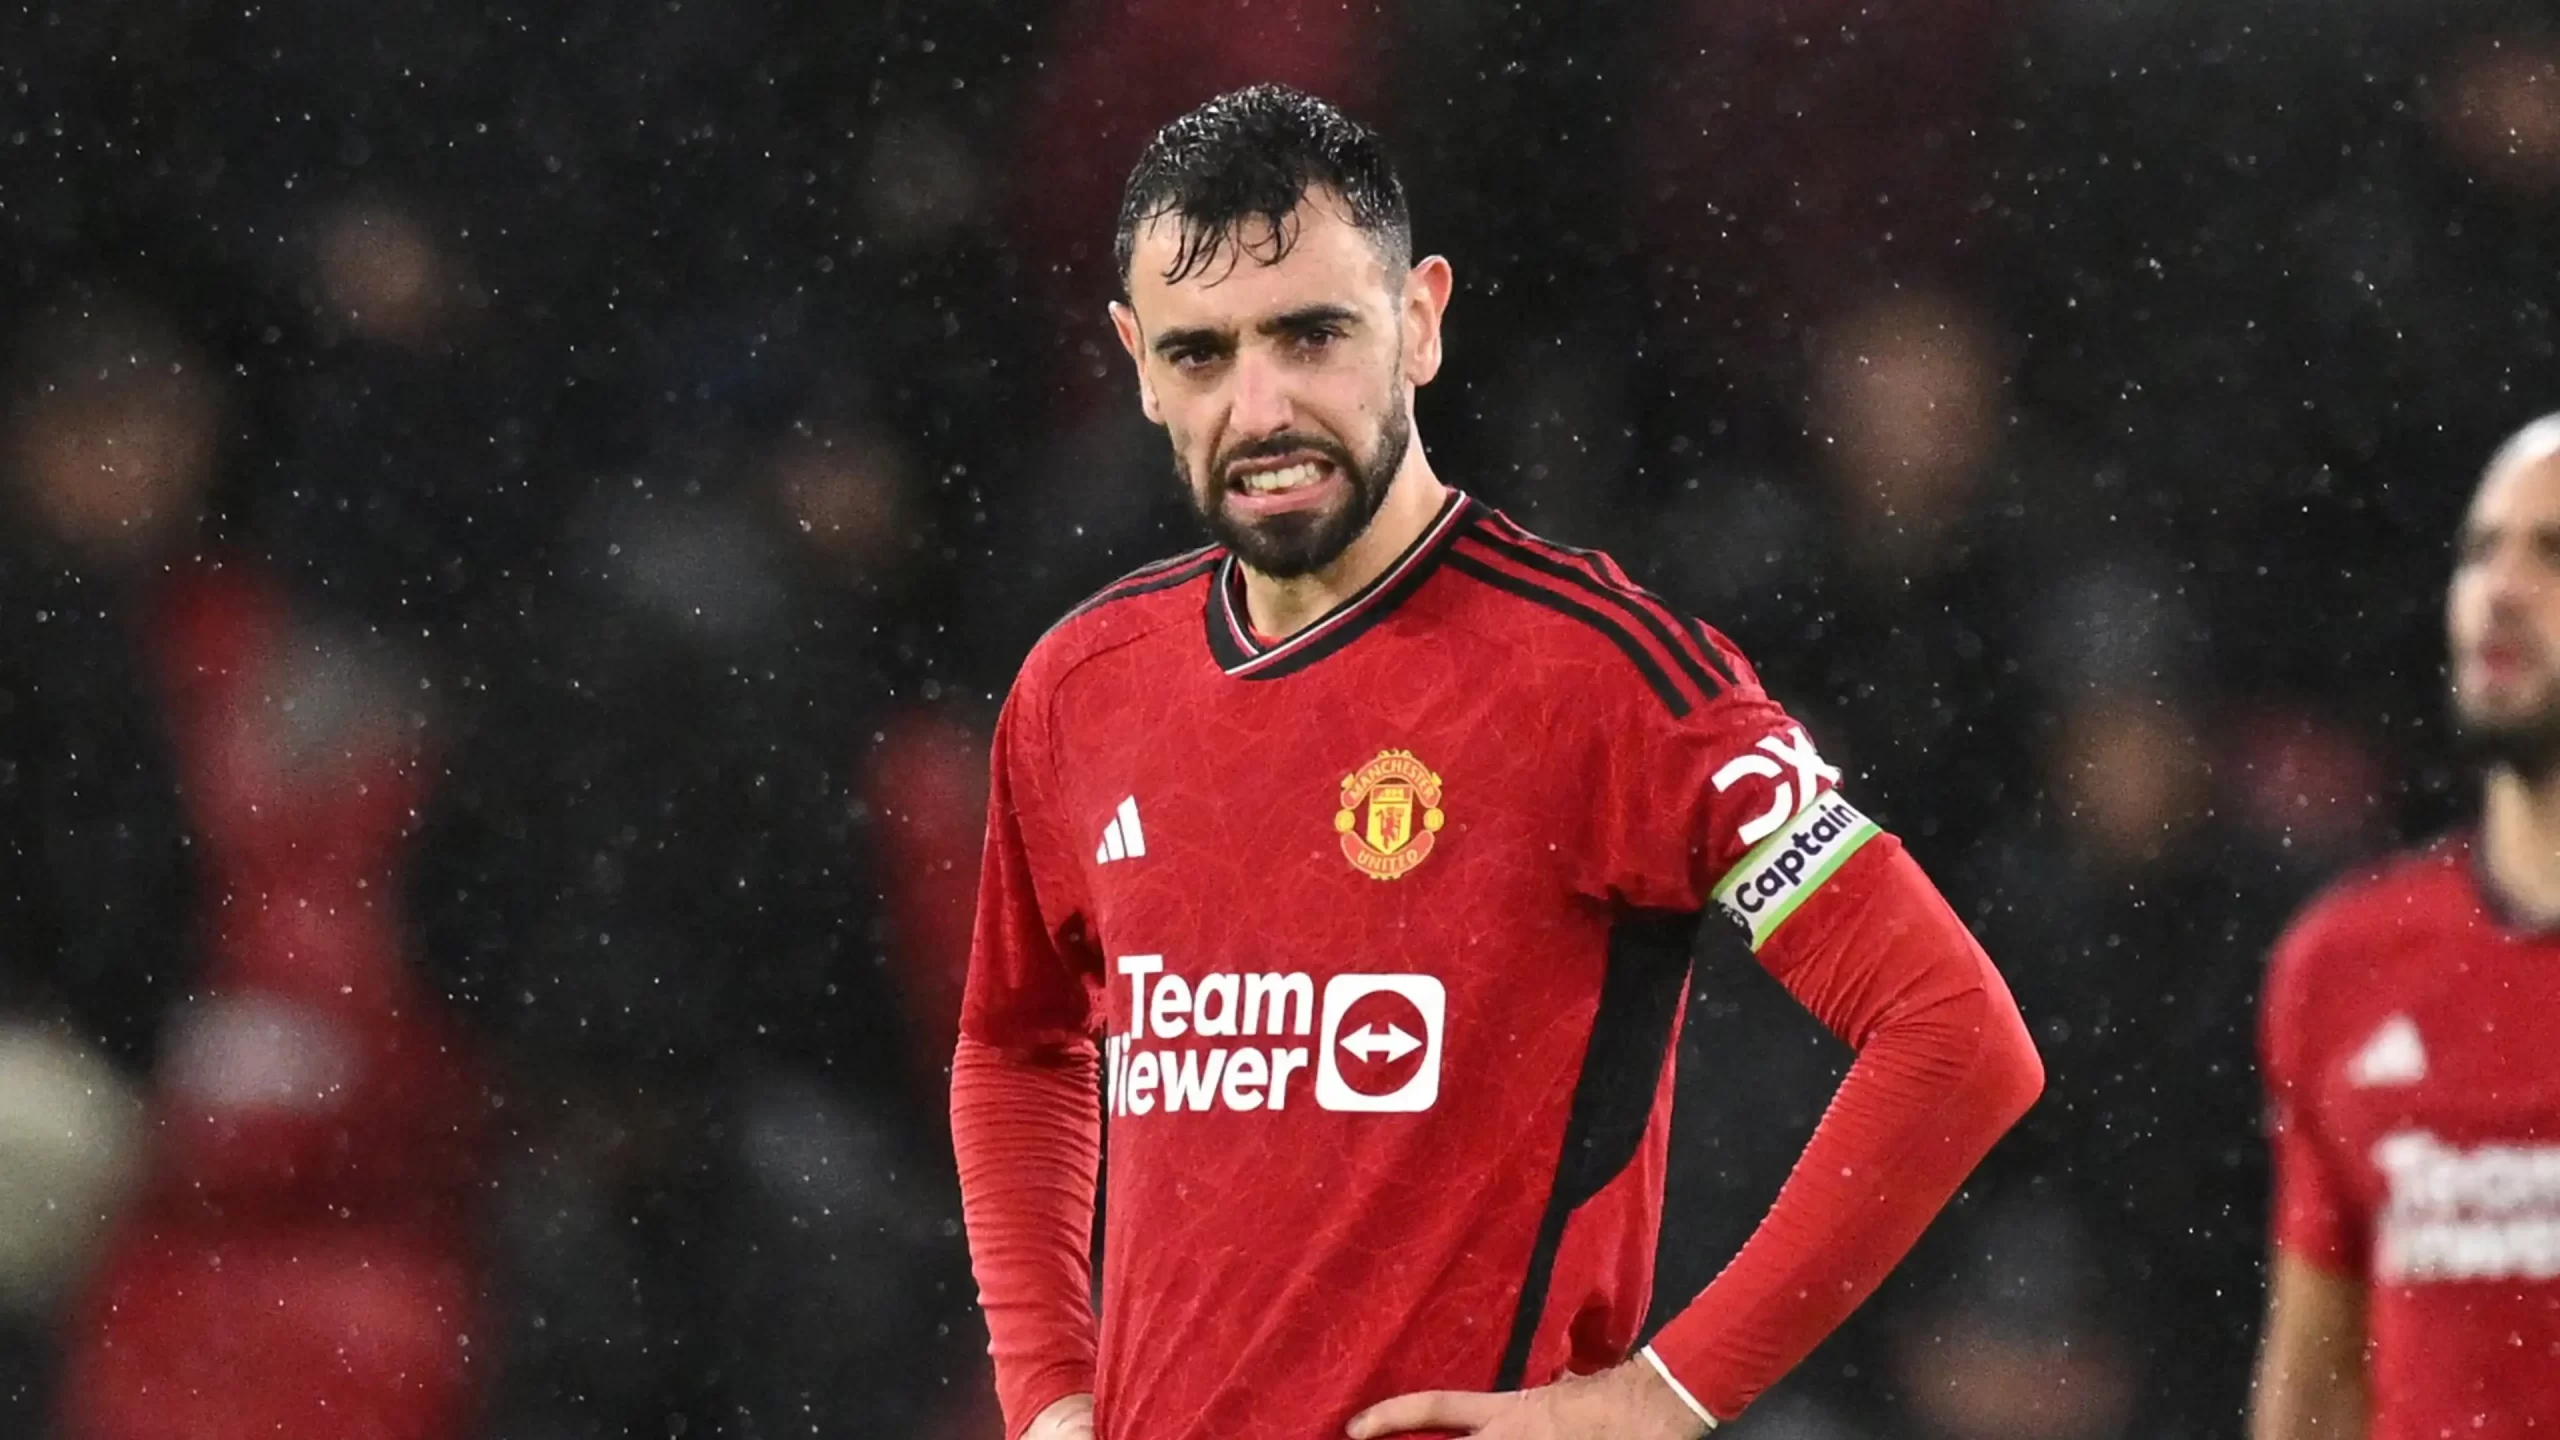 "We're not hiding from that" -- Bruno Fernandes on Man City defeat